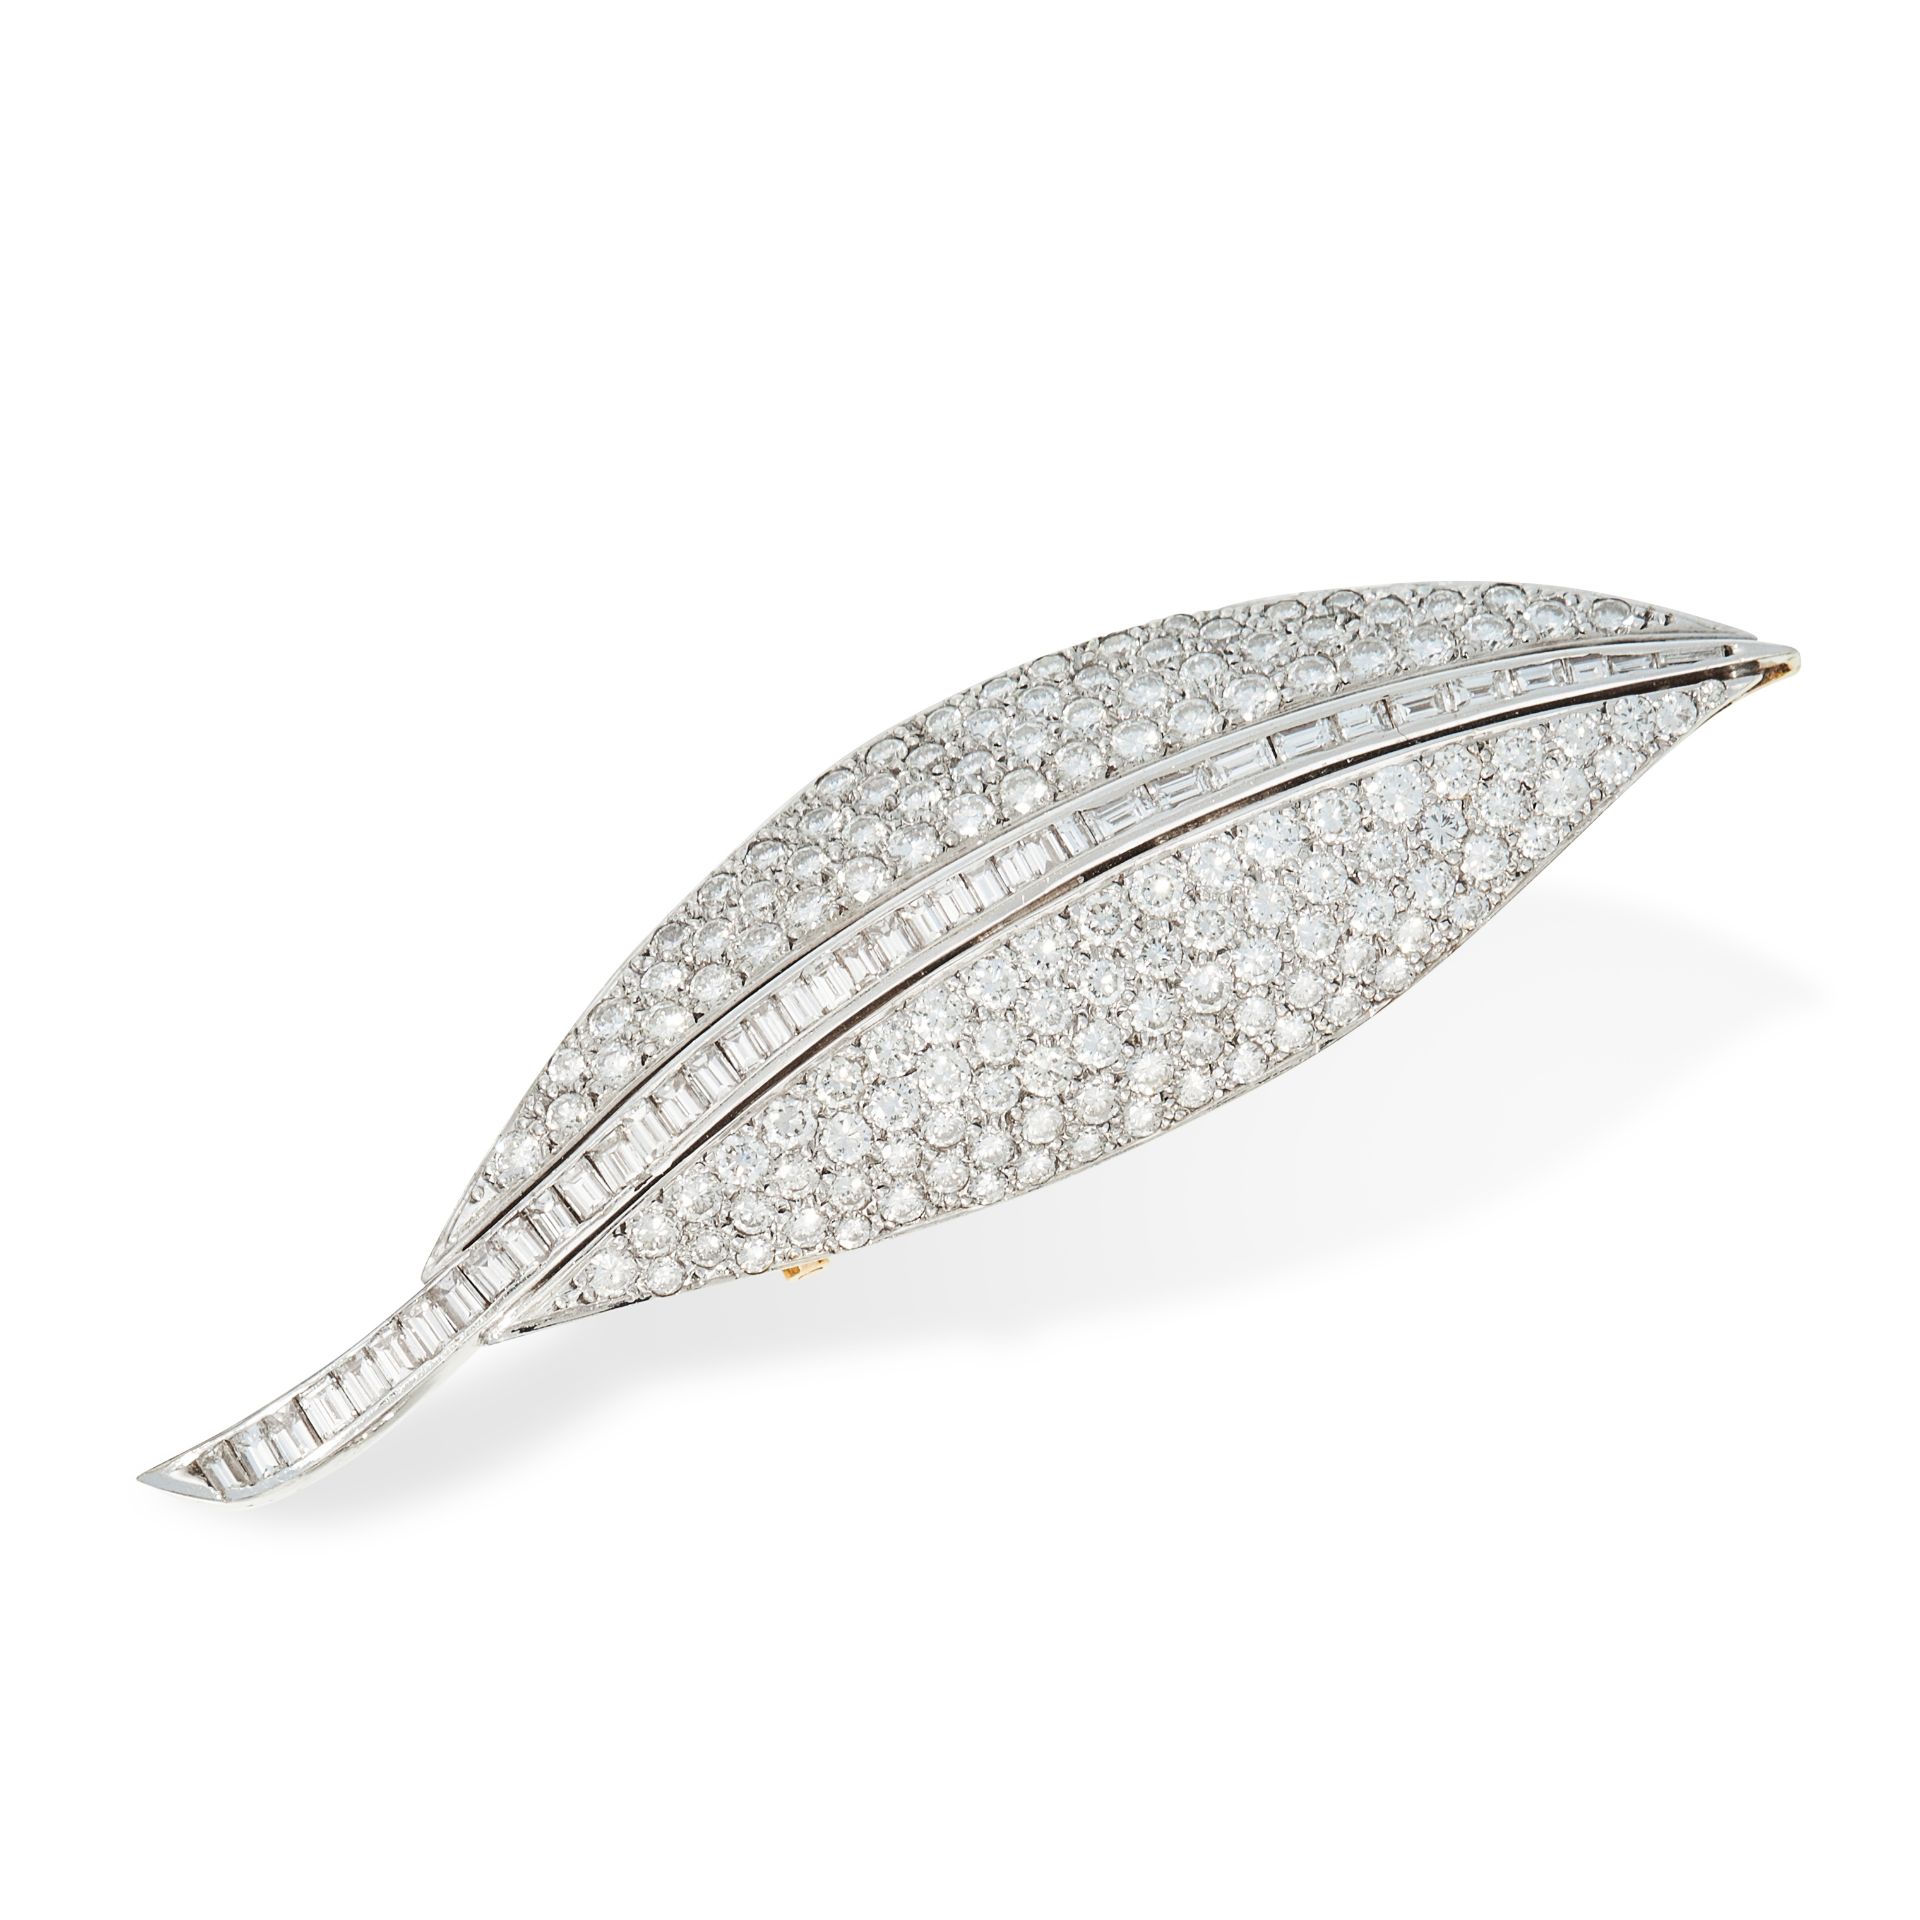 DIAMOND BROOCH designed as a leaf, pave-set with brilliant-cut diamonds, the centre channel-set with